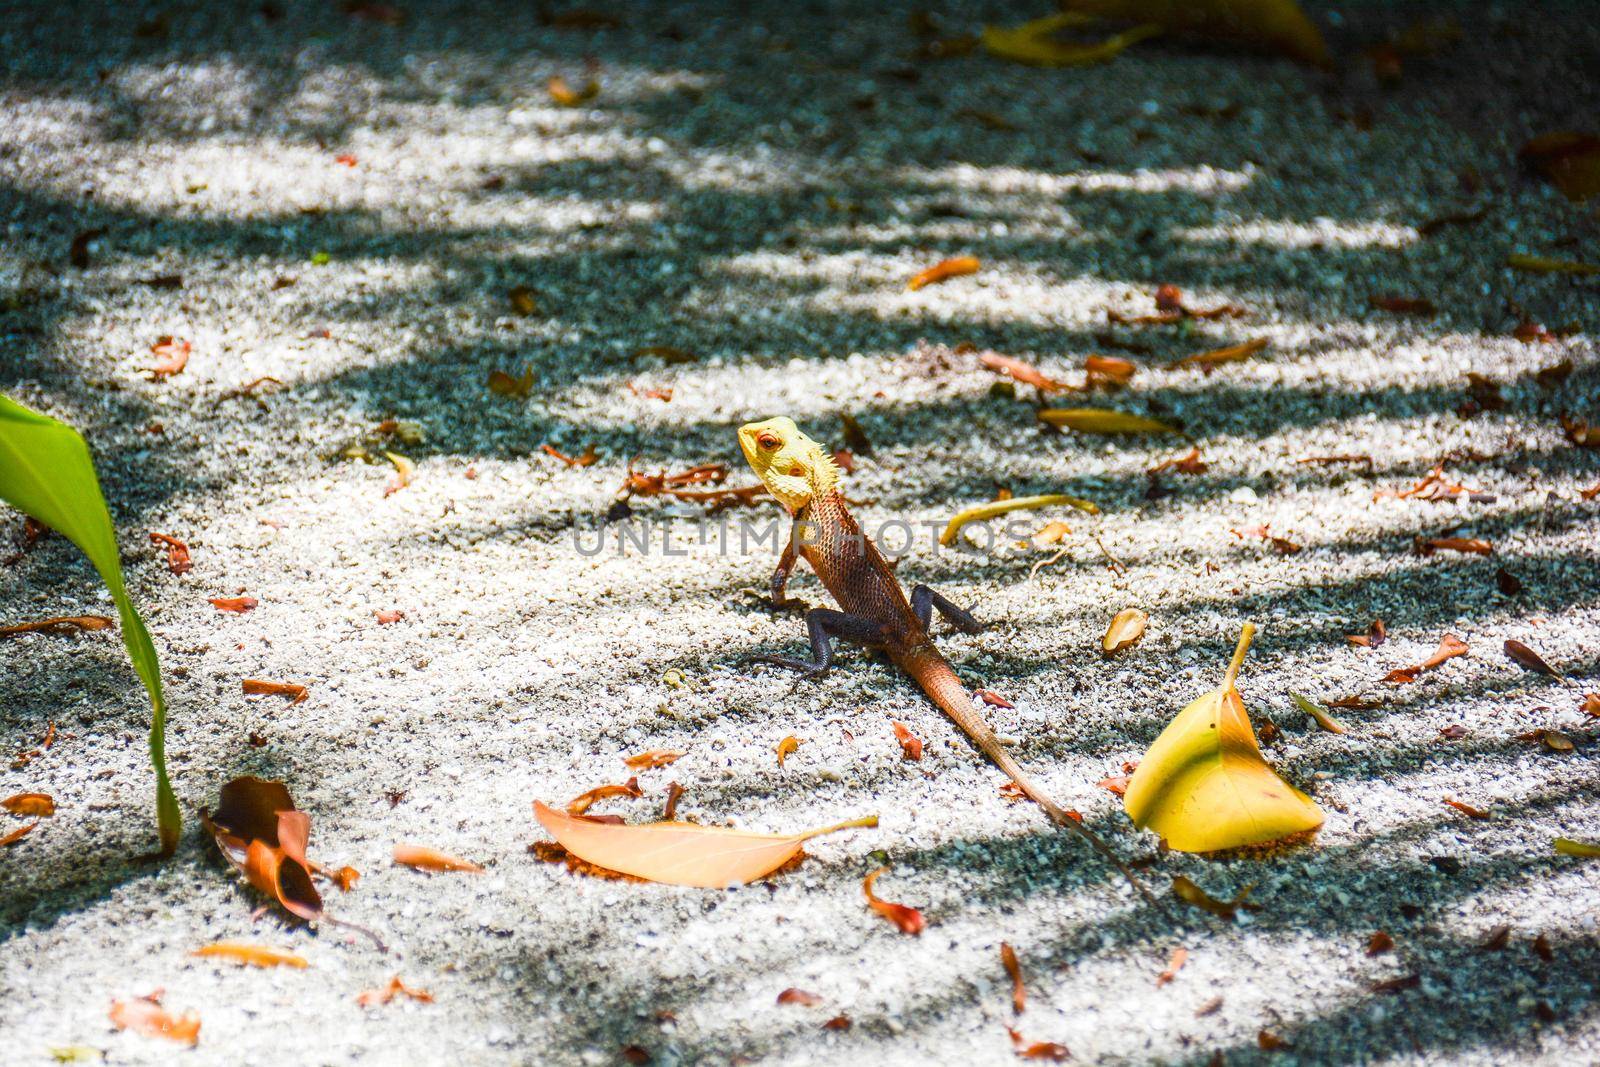 wild reptile on a tropical atoll motionless to blend in